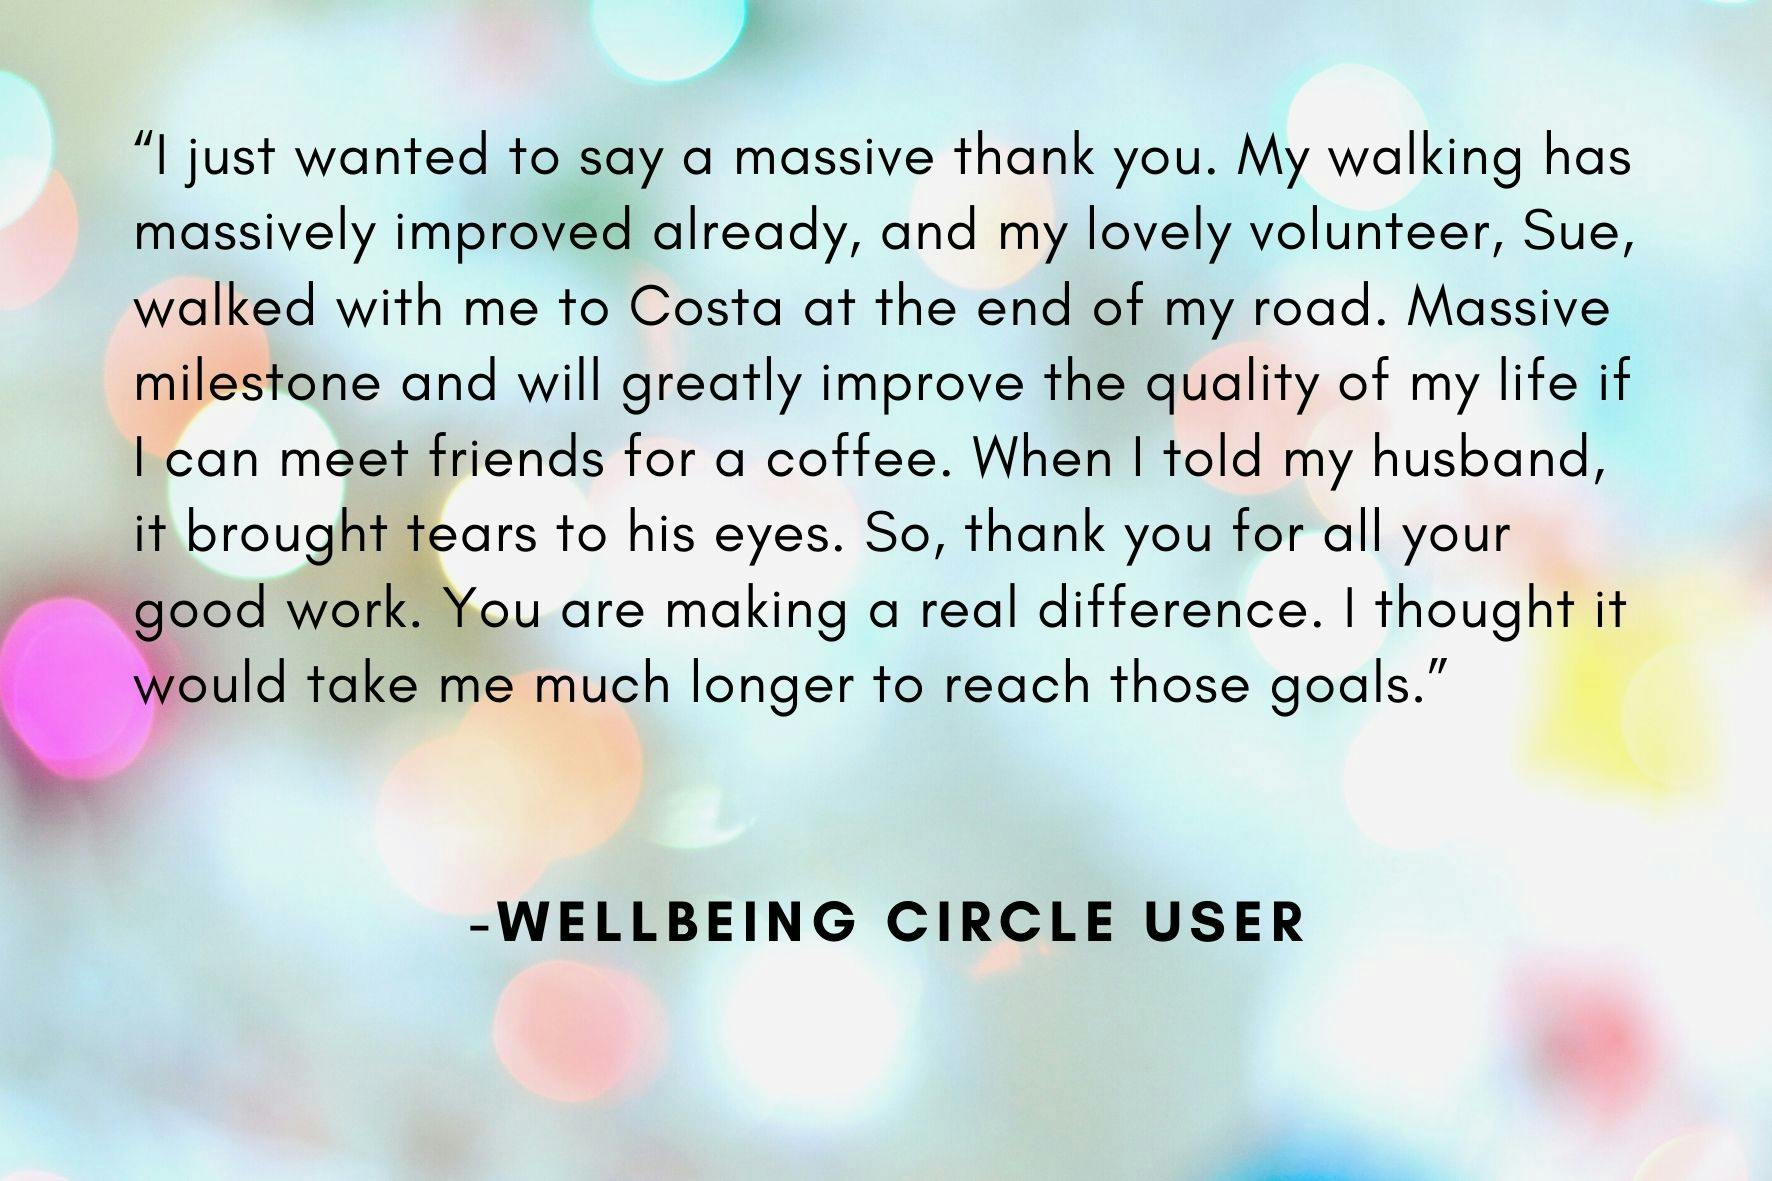 Wellbeing Circle user quote